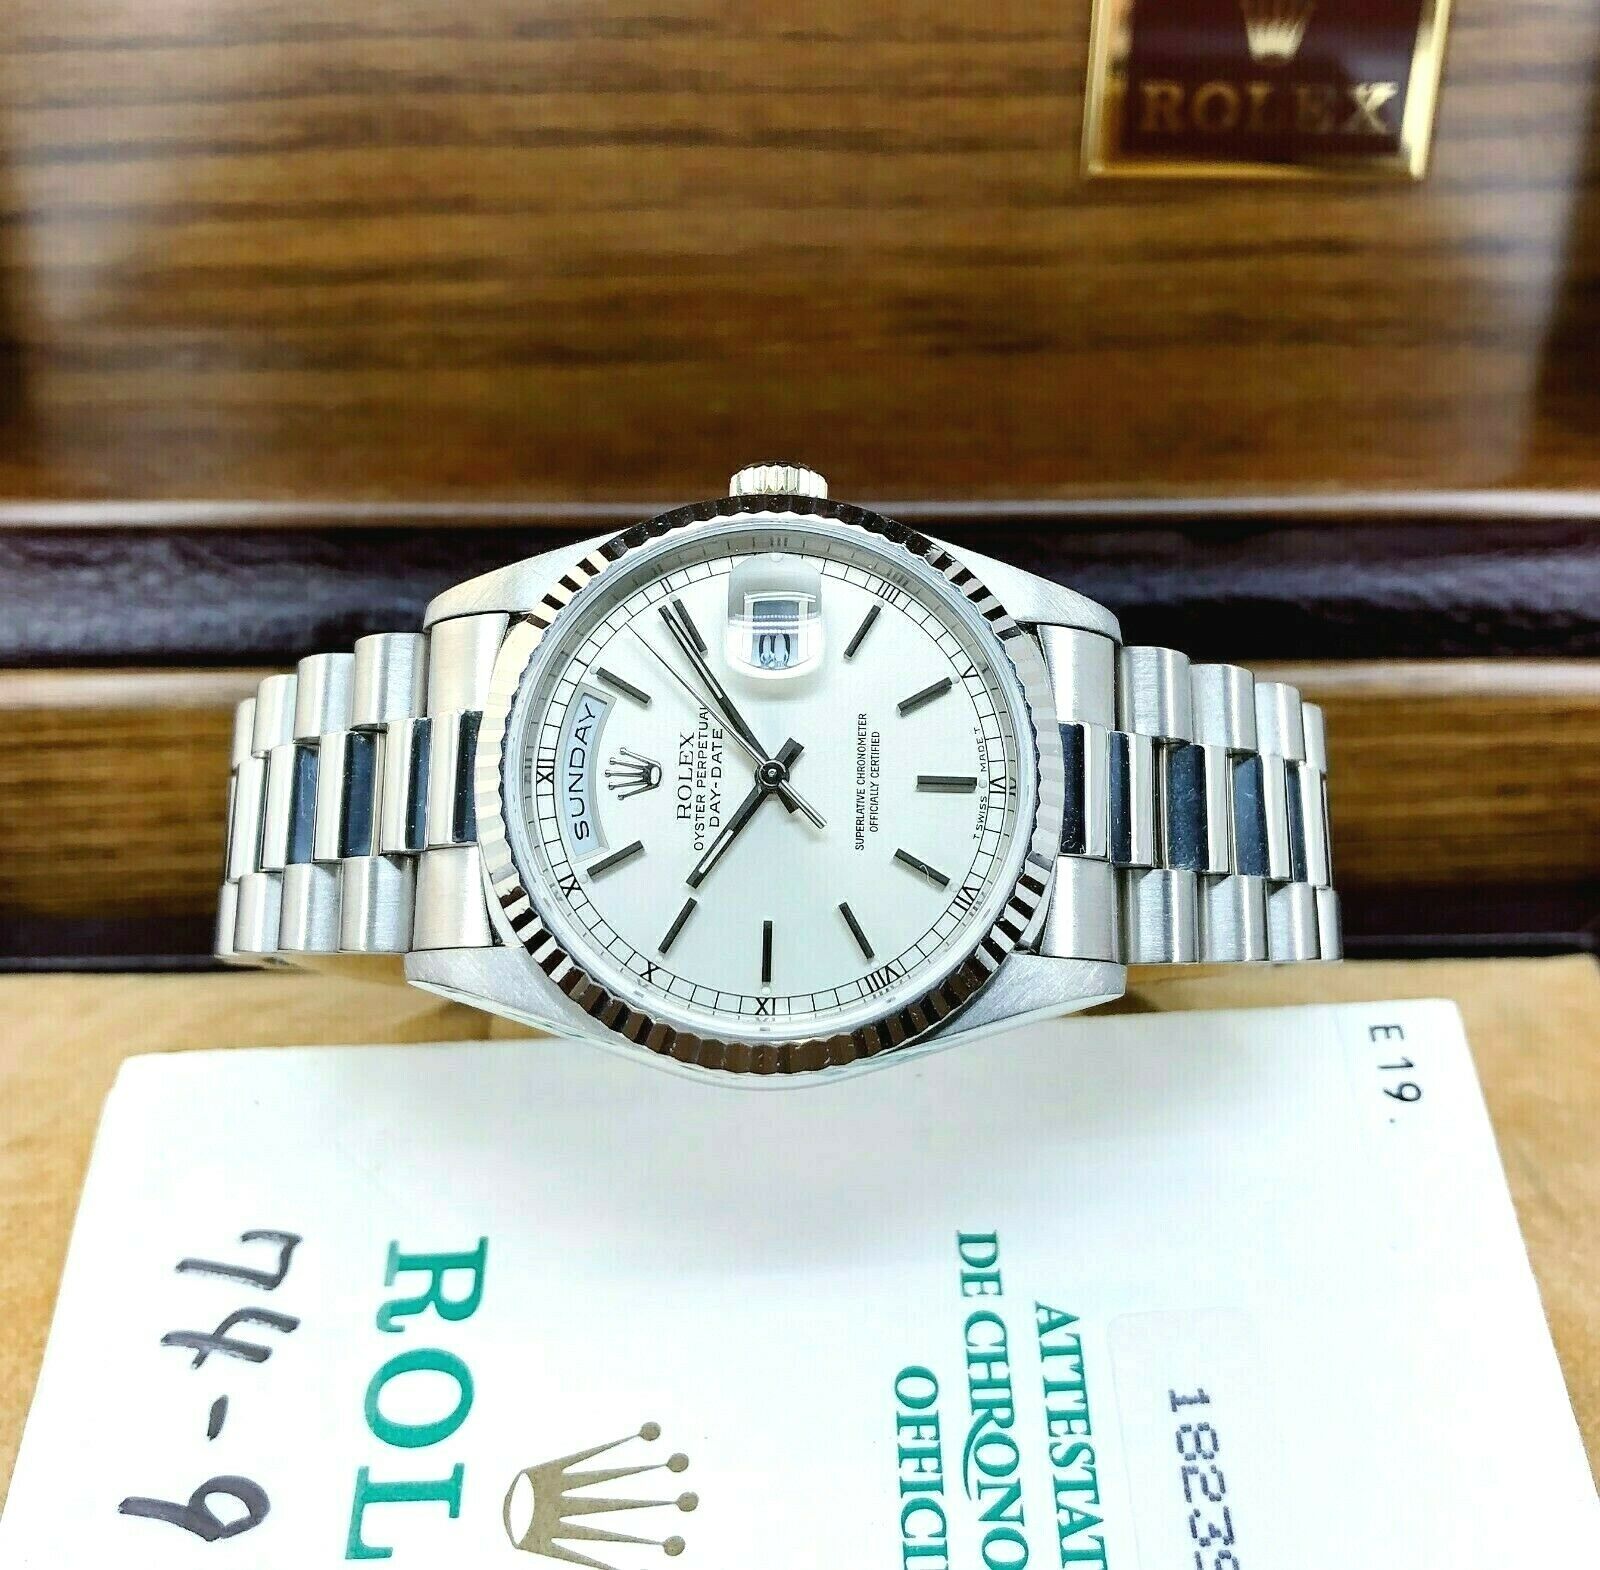 Rolex Day Date President 18K White Gold 36mm Watch 18239 Box and Papers DQ Set